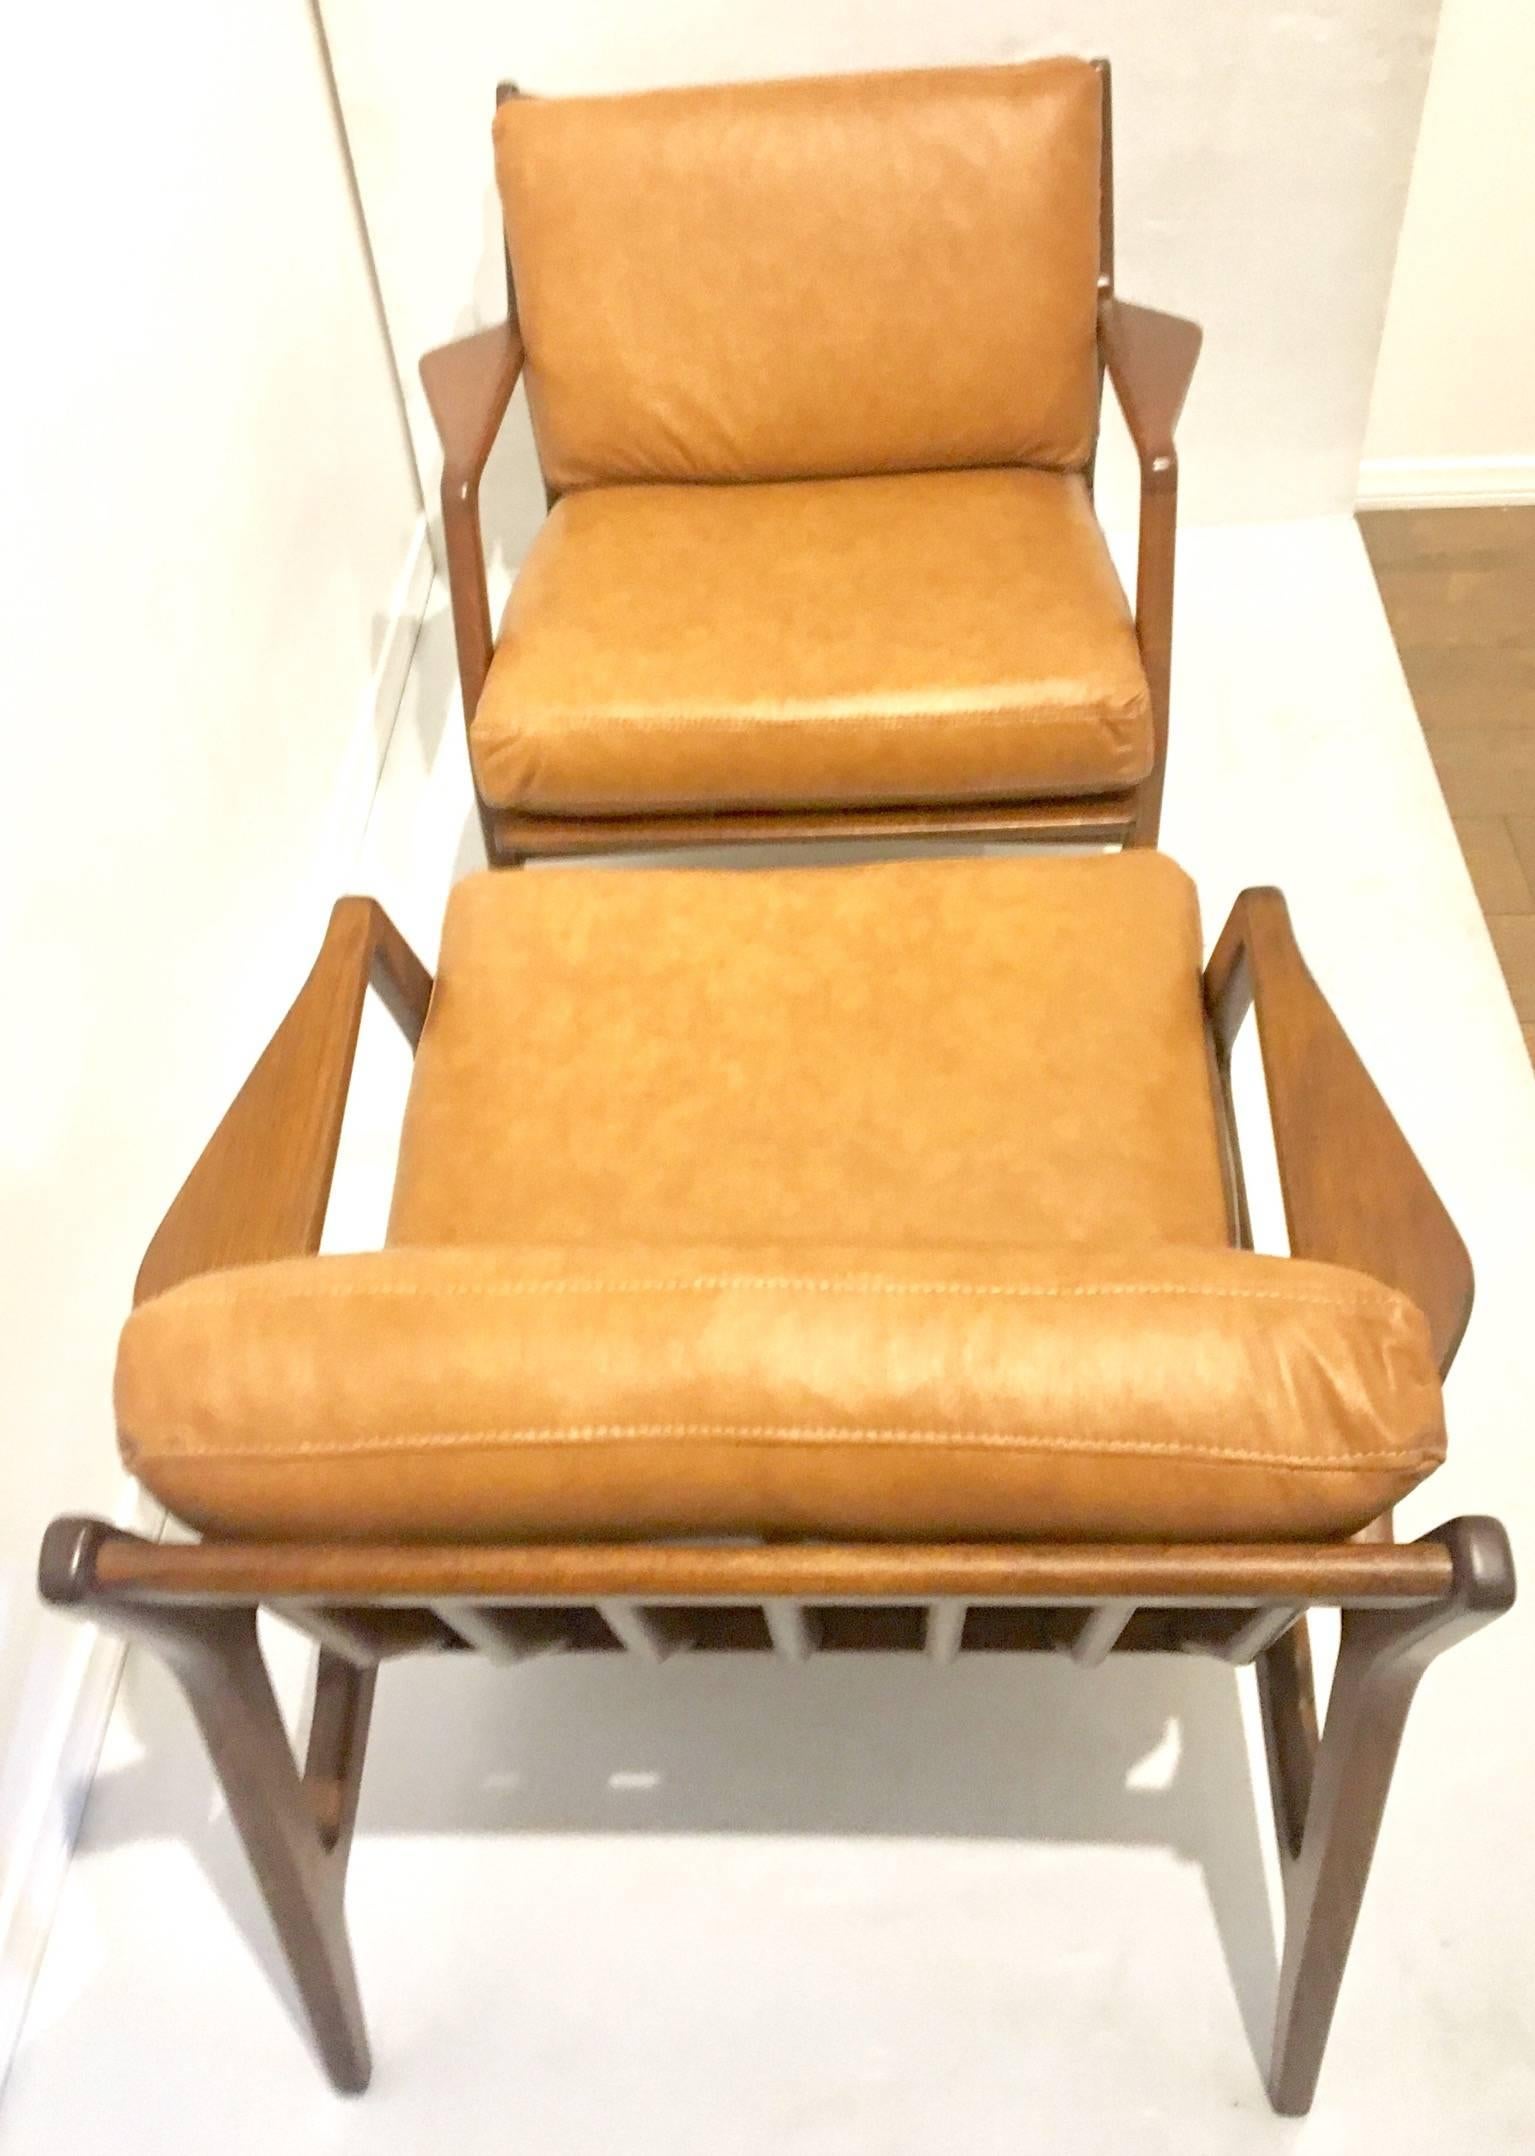 Pair of Danish Modern Chairs in Leather by Kofod Larsen 1